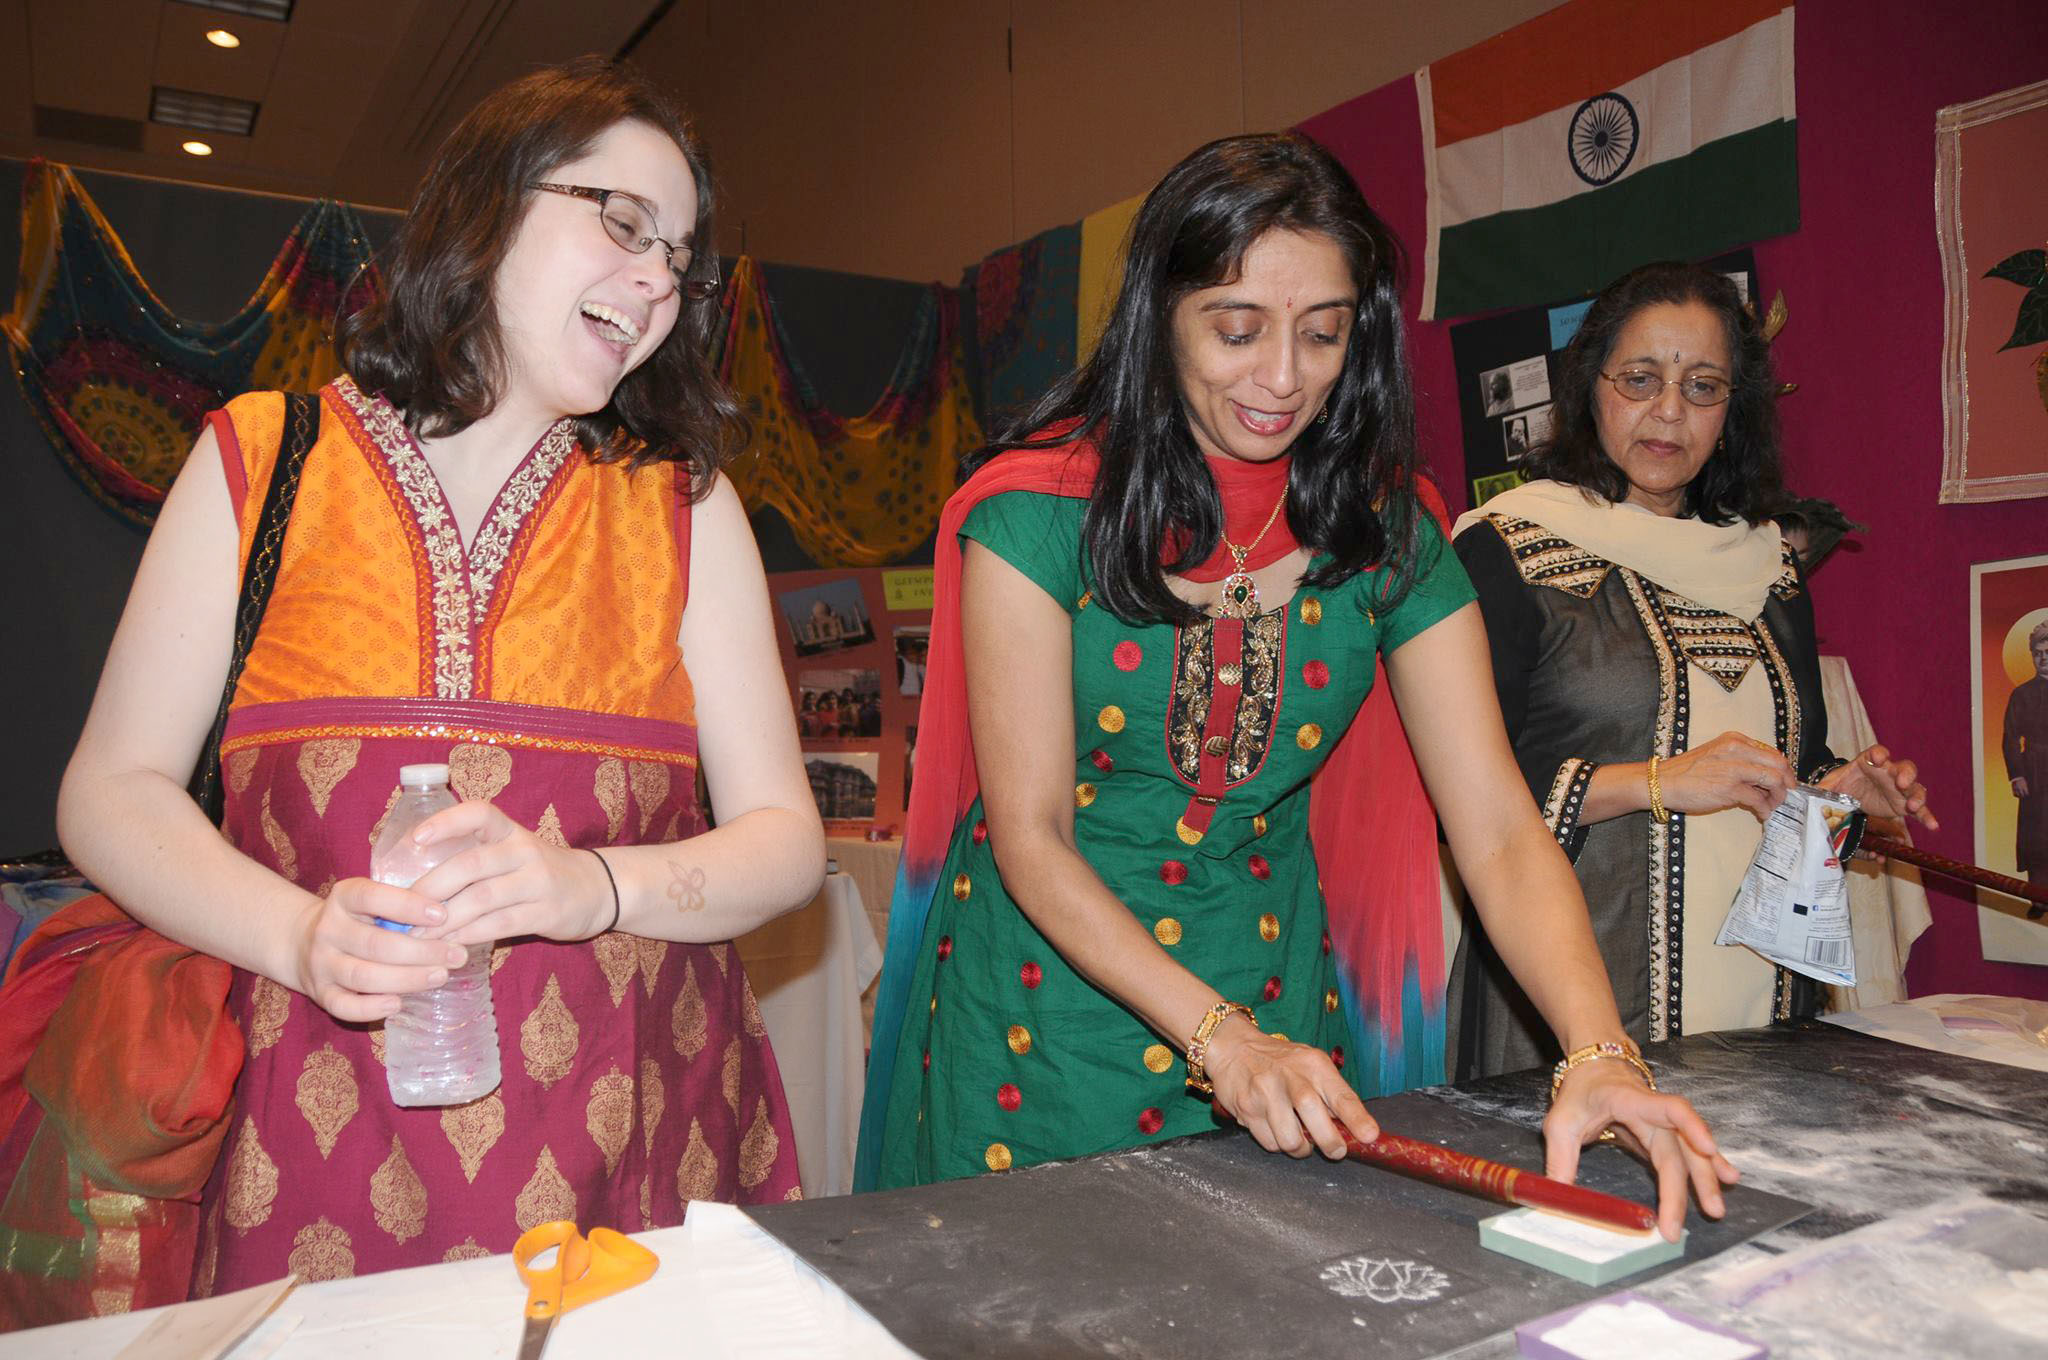 Nina Shalom, center, a member of the International Festival committee, works with volunteers at the booth that represents India at the Global Village at the Hopkinsville. The festival, which began in 2009, celebrates the county's rich cultural diversity. Photo submitted by the City of Hopkinsville